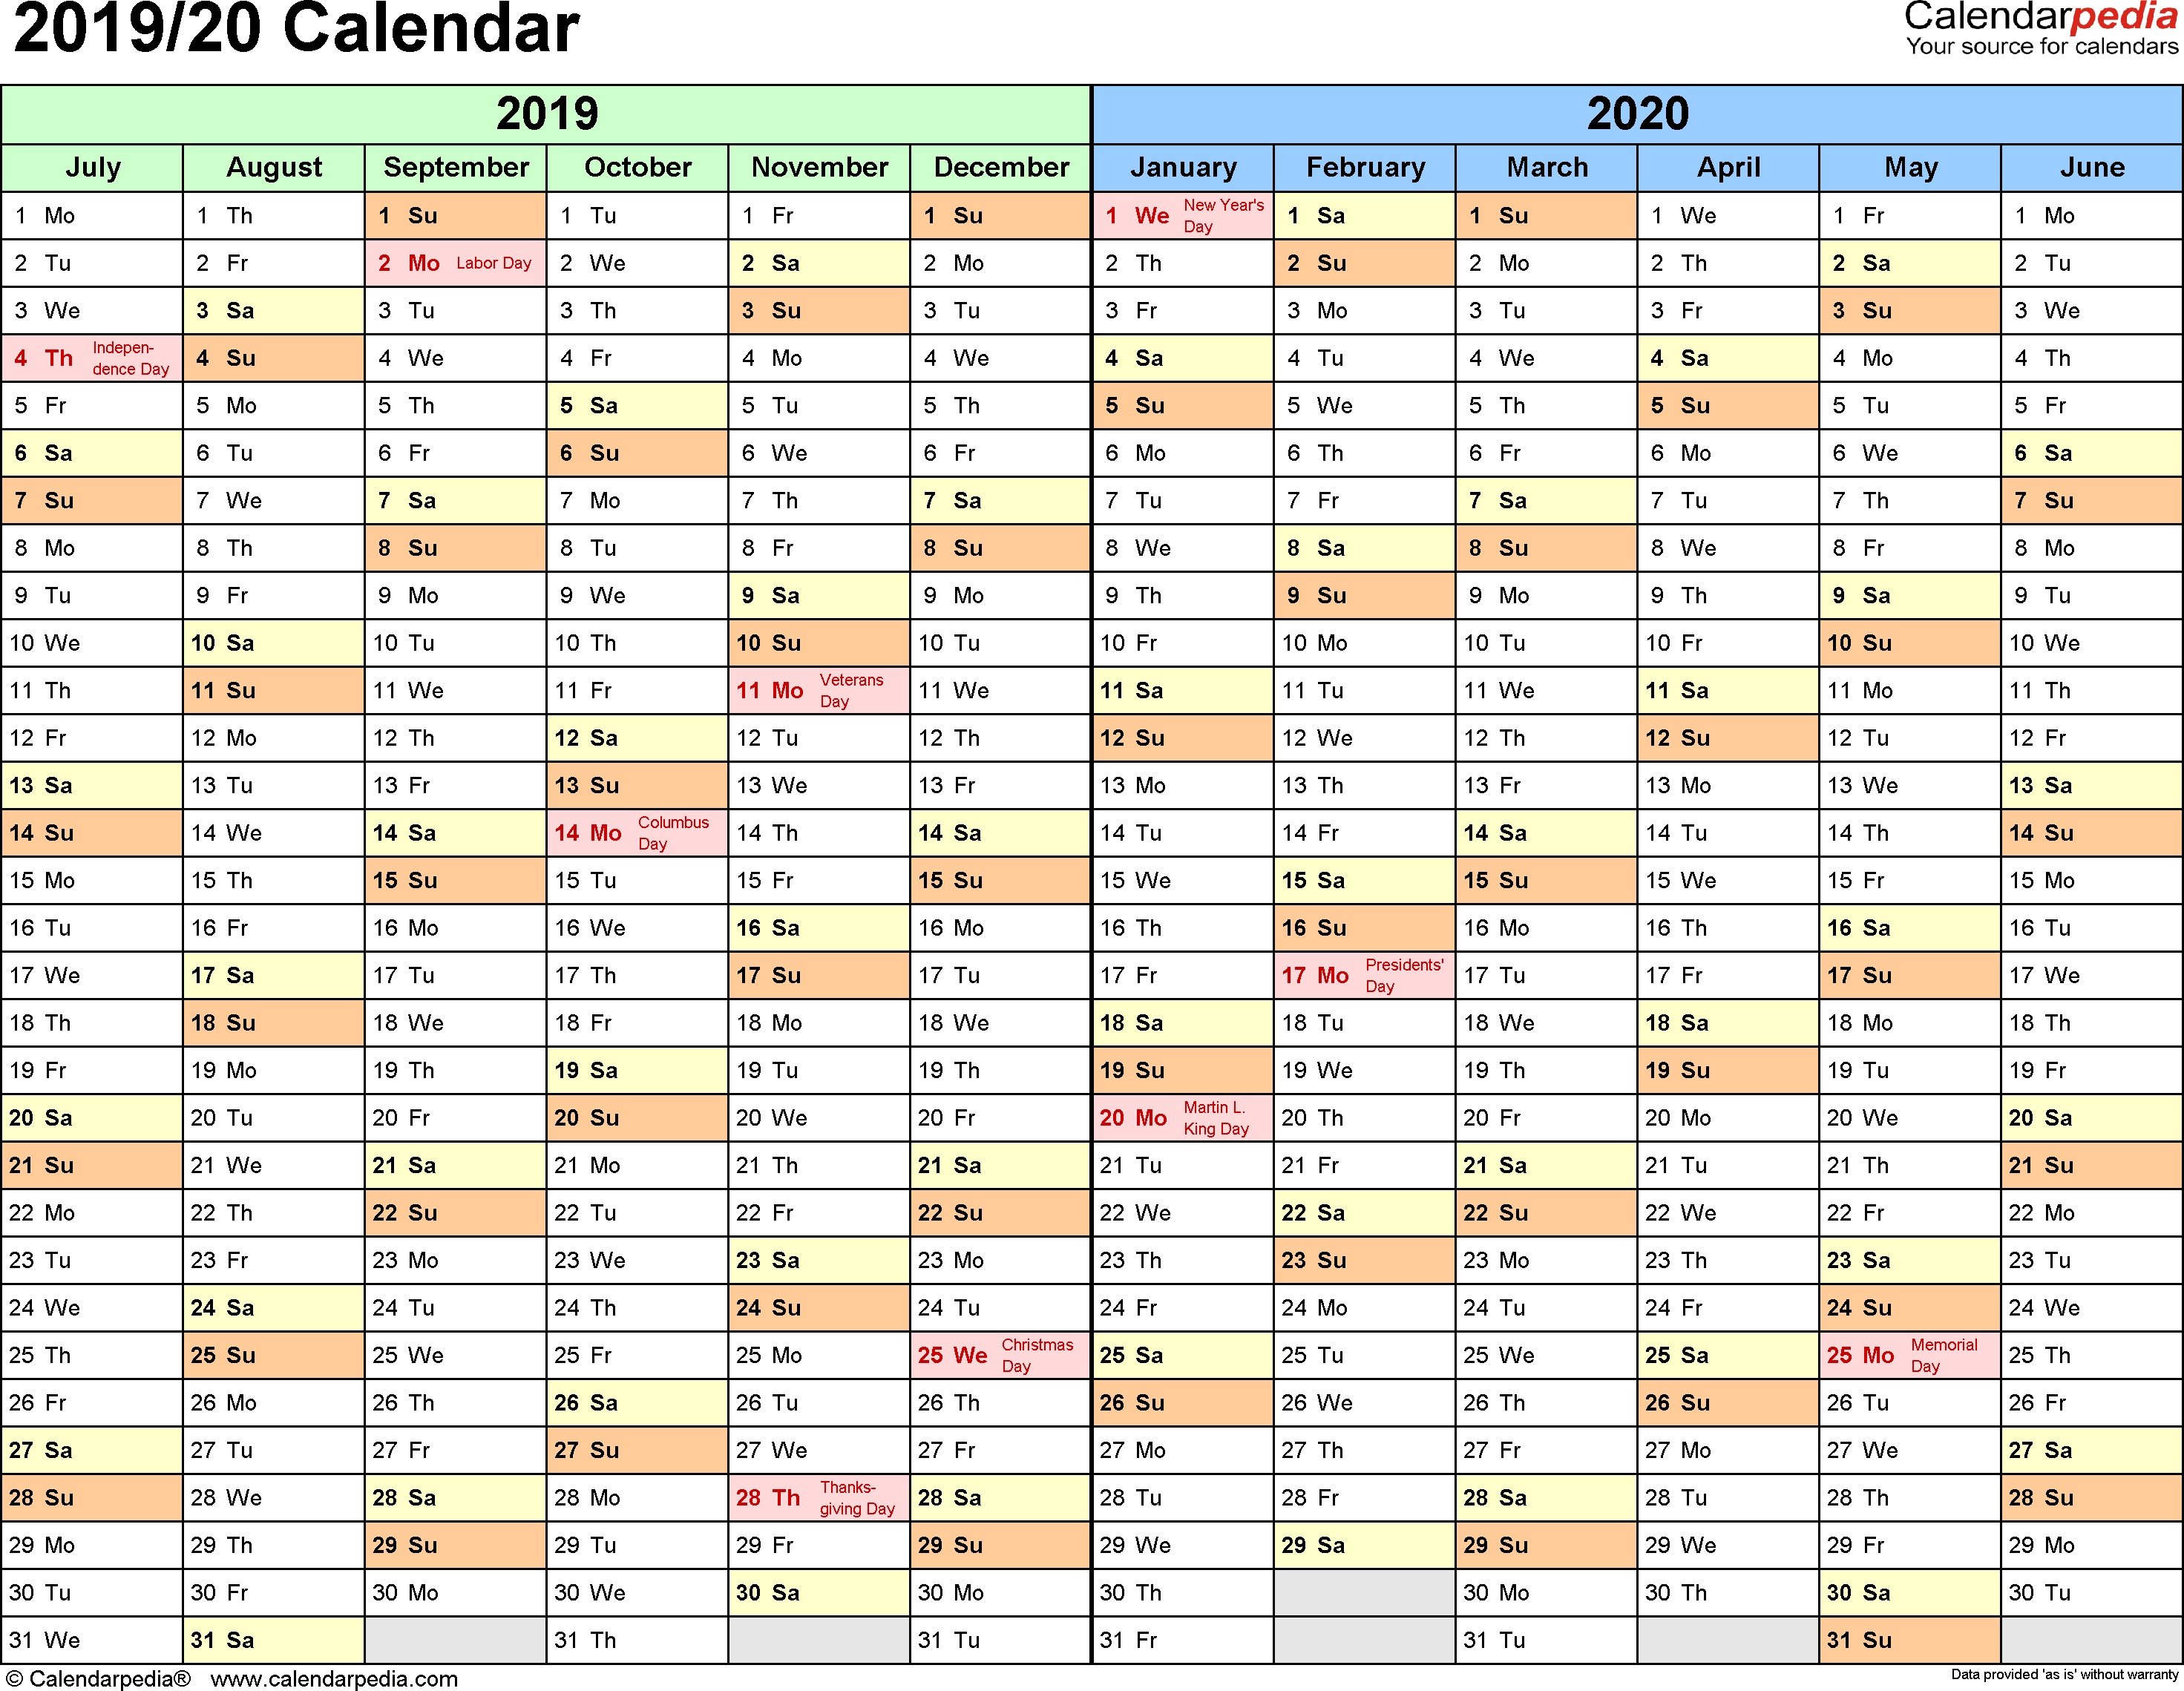 Split Year Calendar 2019/20 (July To June) - Word Templates pertaining to Year At A Glance Calendar 2019-2020